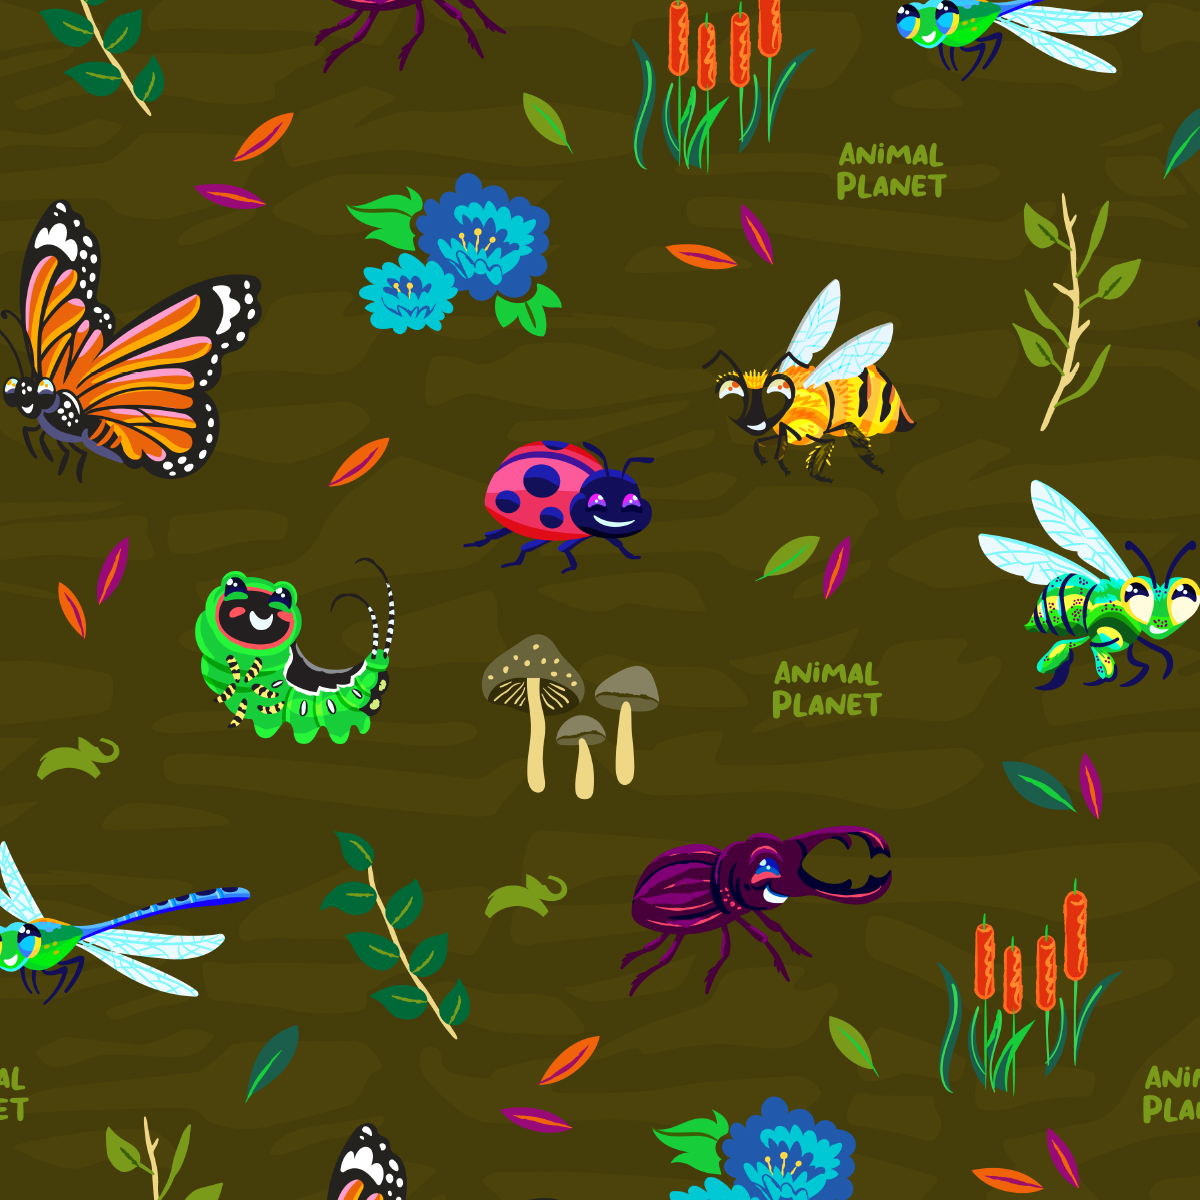 Repeat pattern featuring character art of the illustrated bugs and graphic elements depicting their habitat.